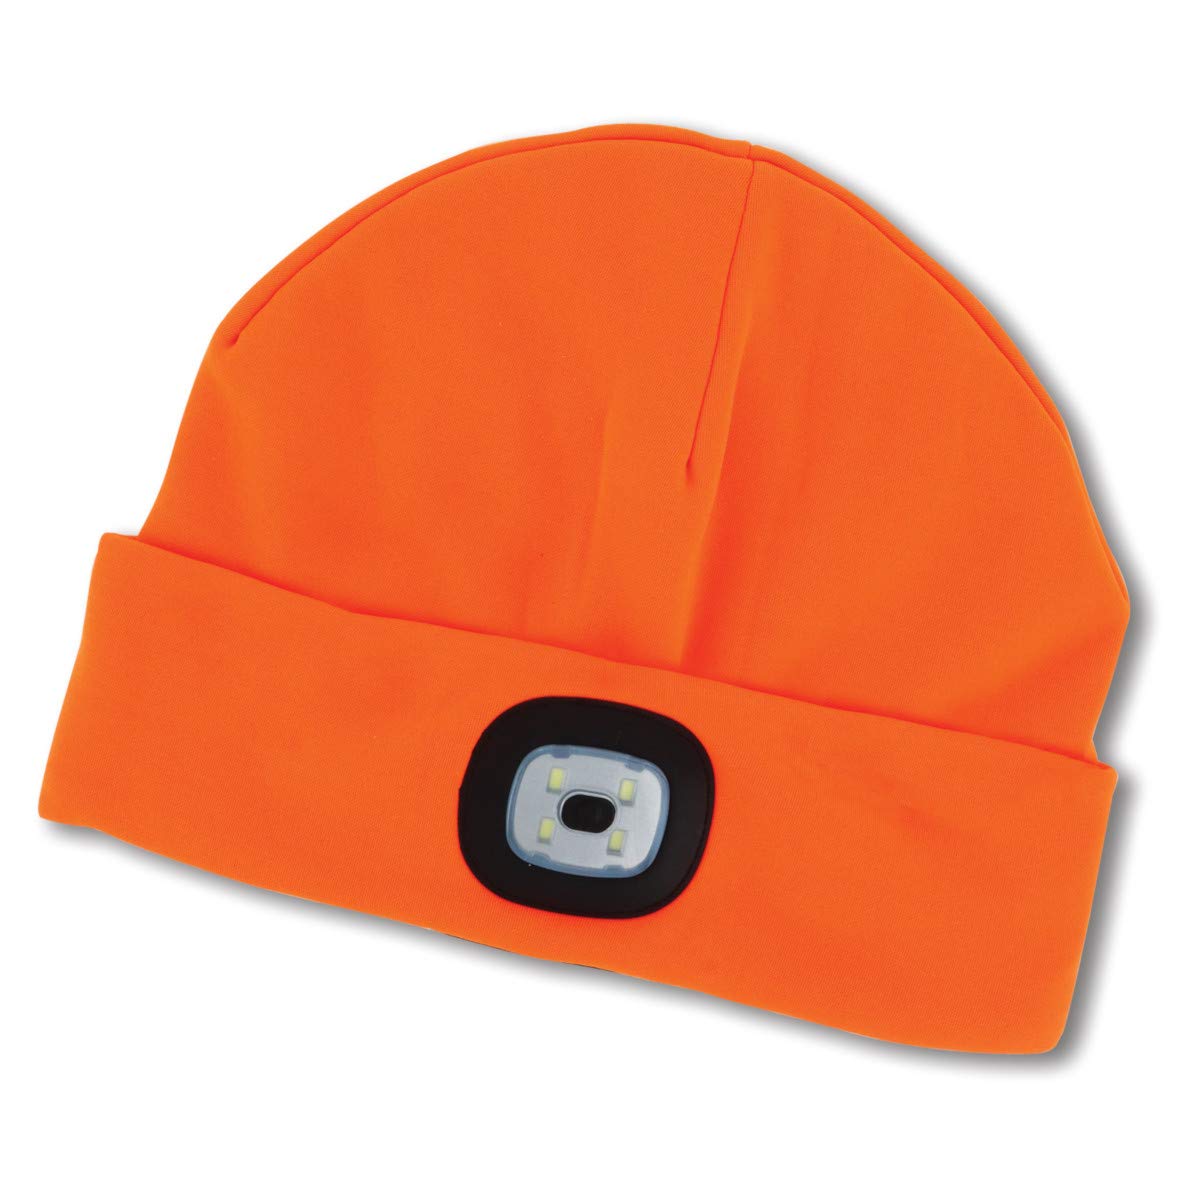 orange Men's Rechargeable LED Beanie displayed against a white background